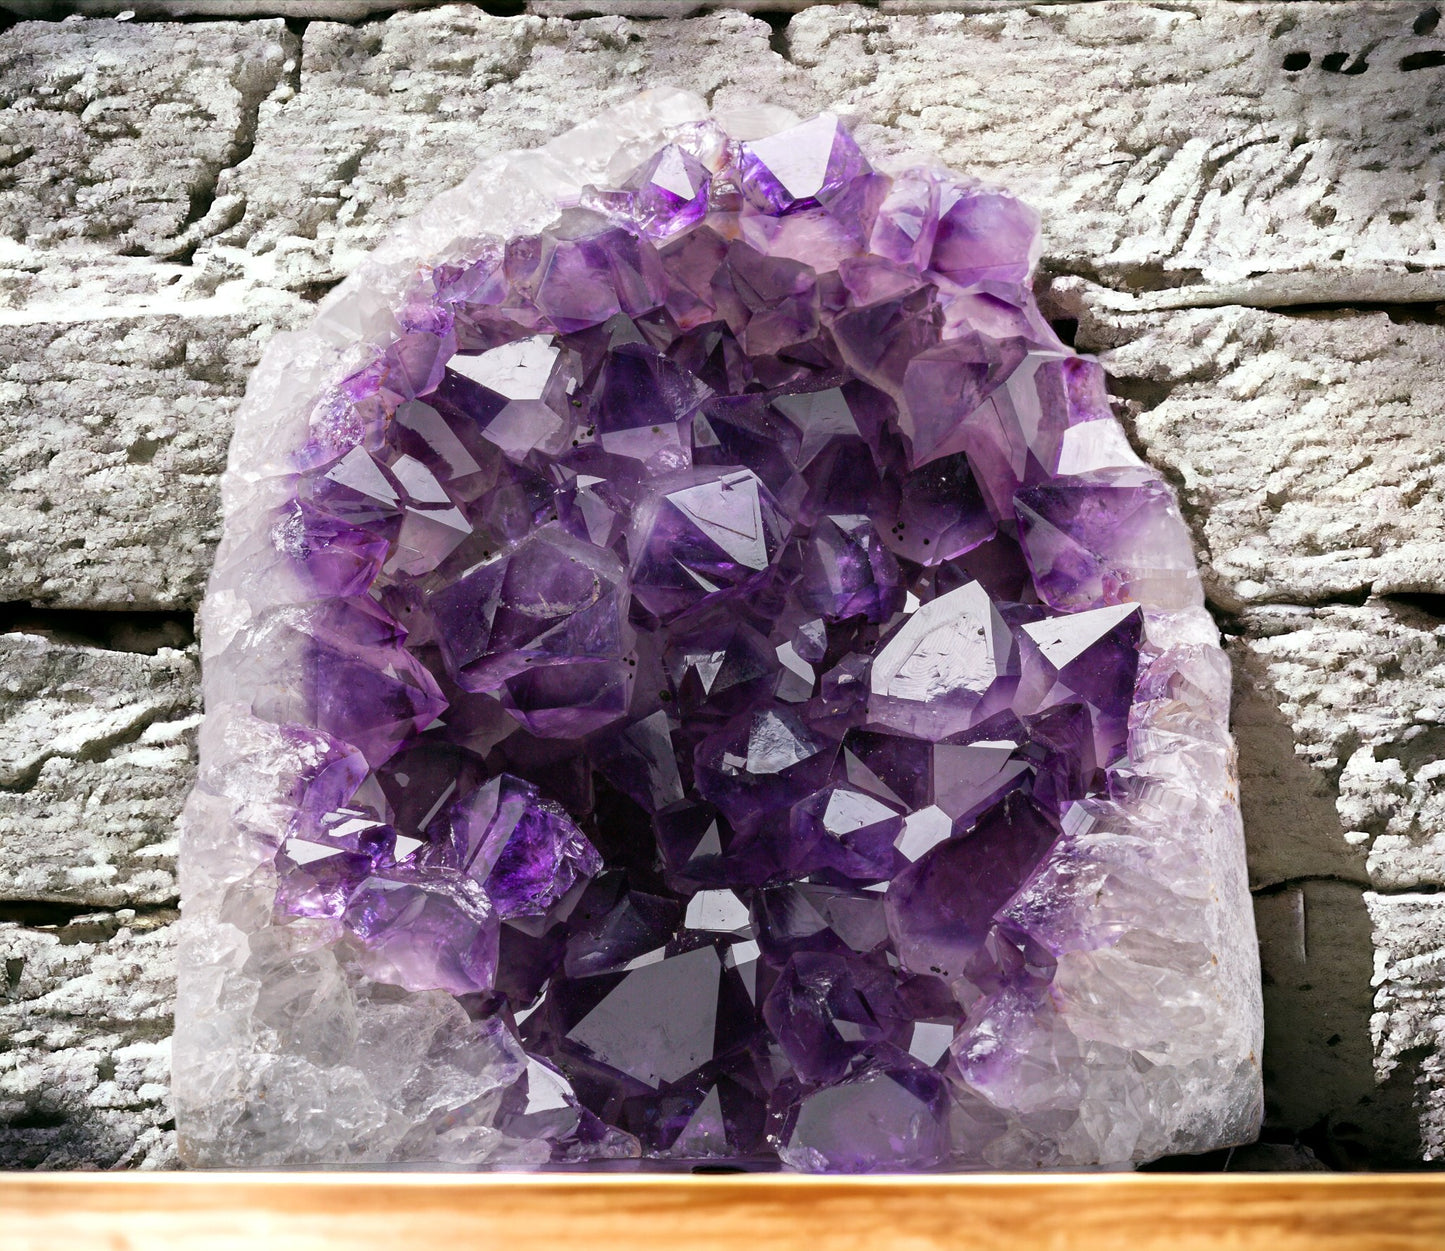 Deep Purple Natural Amethyst Crystal Clusters (1.5 lb to 2 lb) from Uruguay Raw Geode Quartz